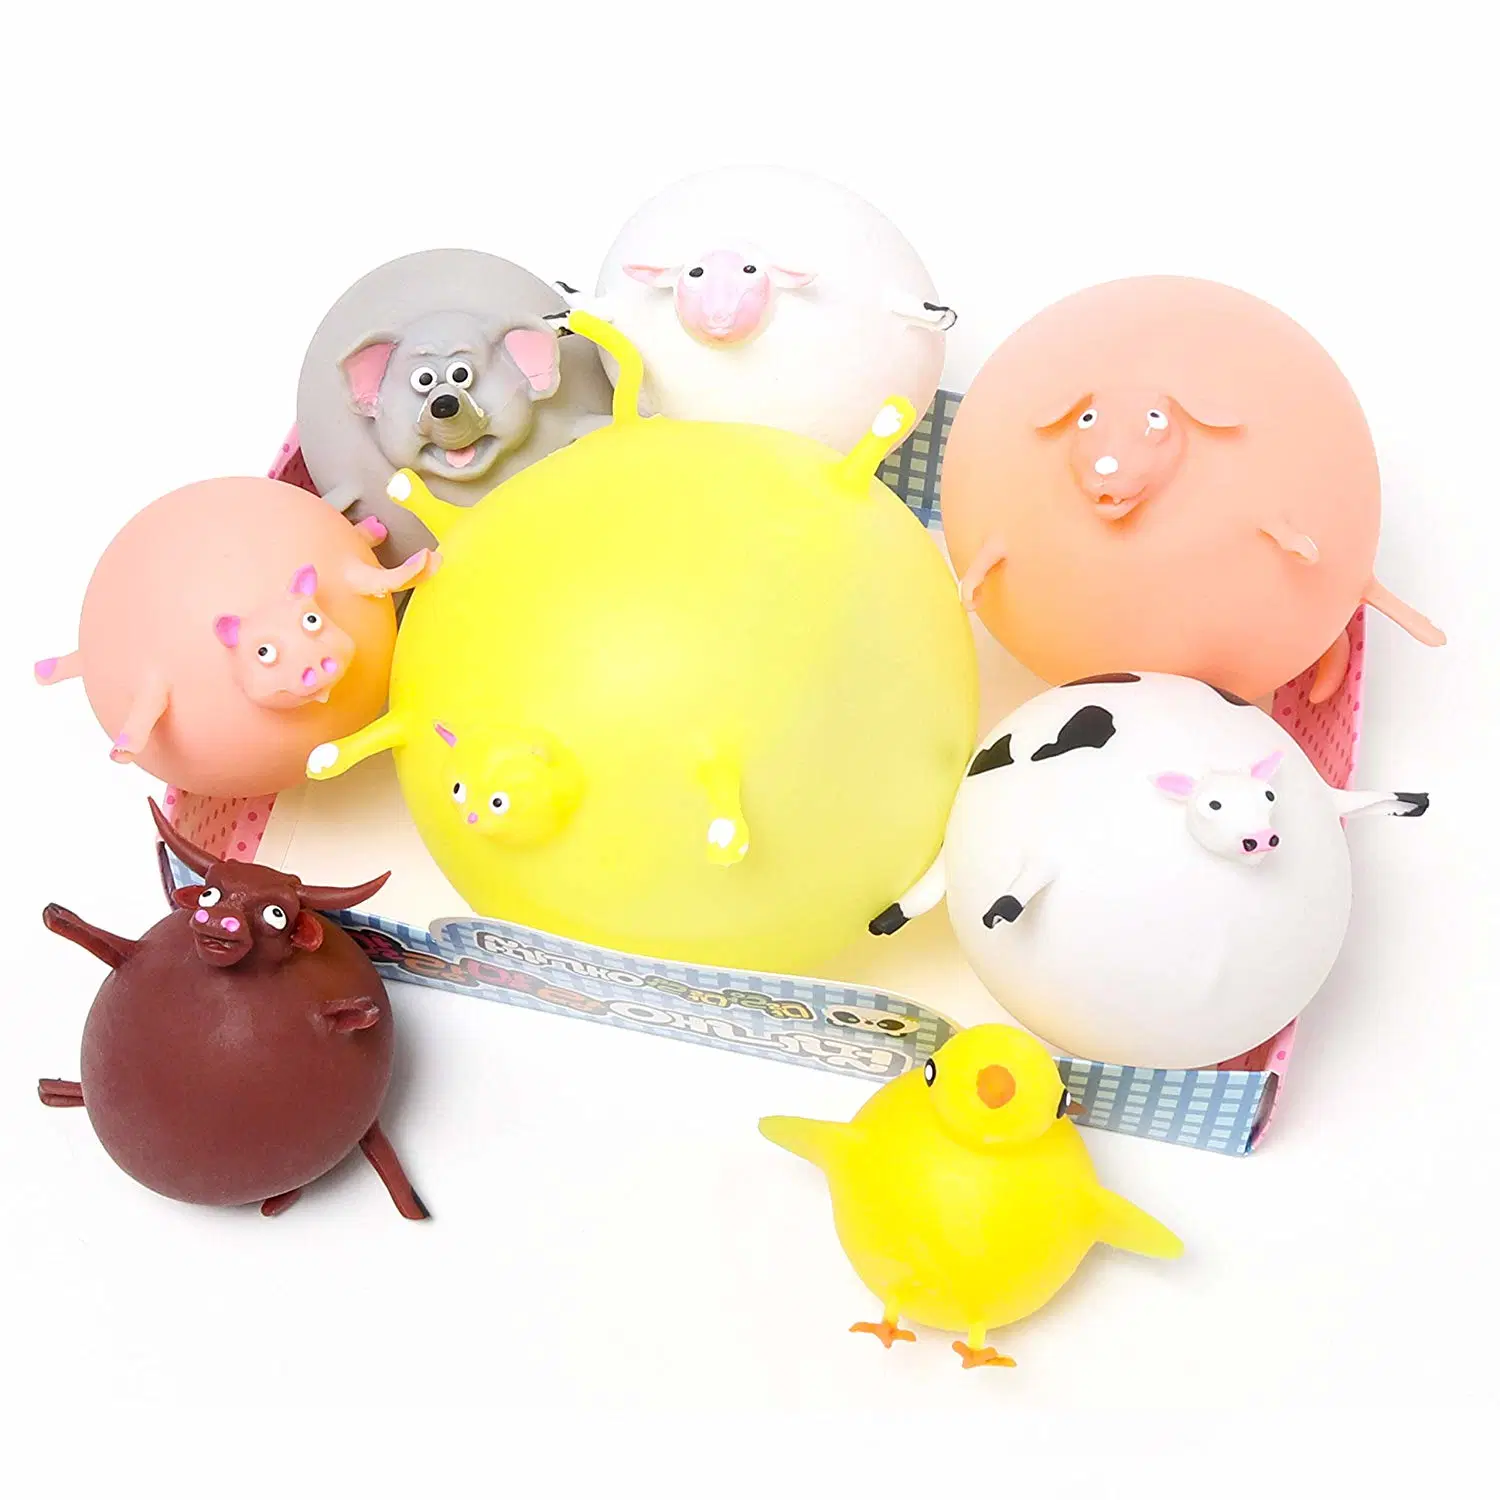 Squishy TPR Animal Shaped Balloons Squishies Anti Stress Ball Relief Toys for Kids